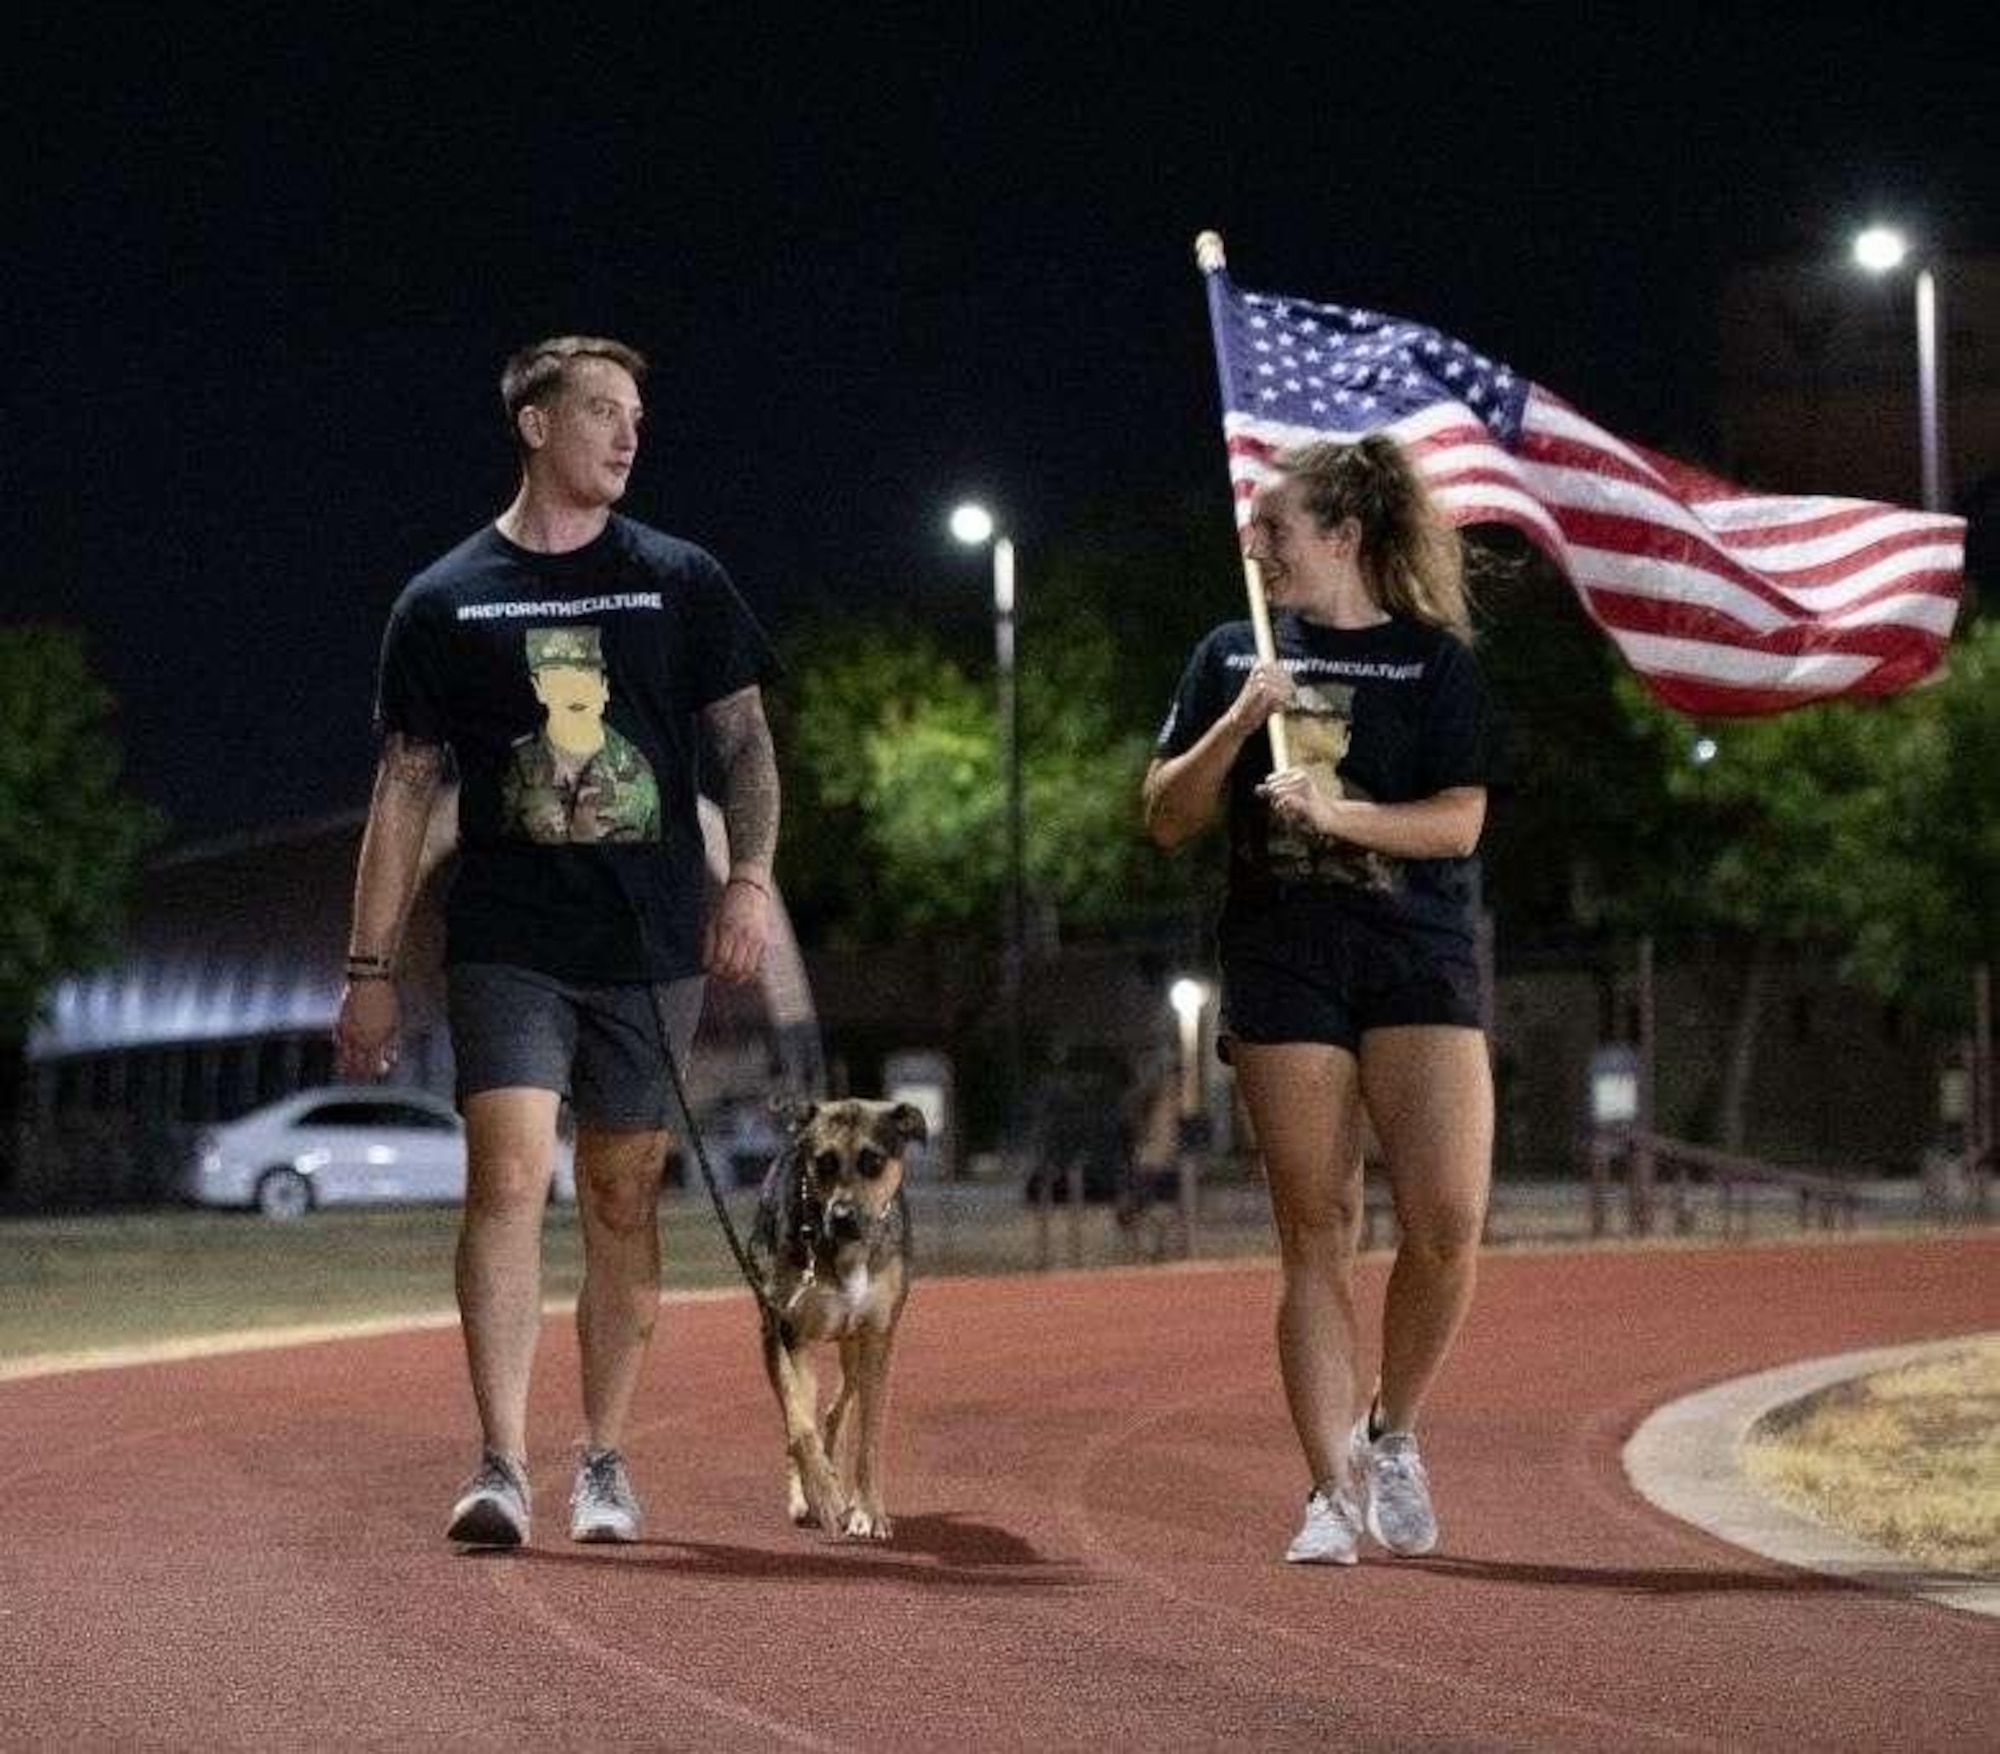 Participants walk the Warhawk Fitness Center track in shifts during a 37th Training Wing hosted 24-hour walk honoring fallen U.S. Army SPC Vanessa Guillen, 25-26 July, 2020. The event was a way for community participants to make a stand against injustice and reiterate the DoD's zero tolerance of sexual misconduct and interpersonal violence.